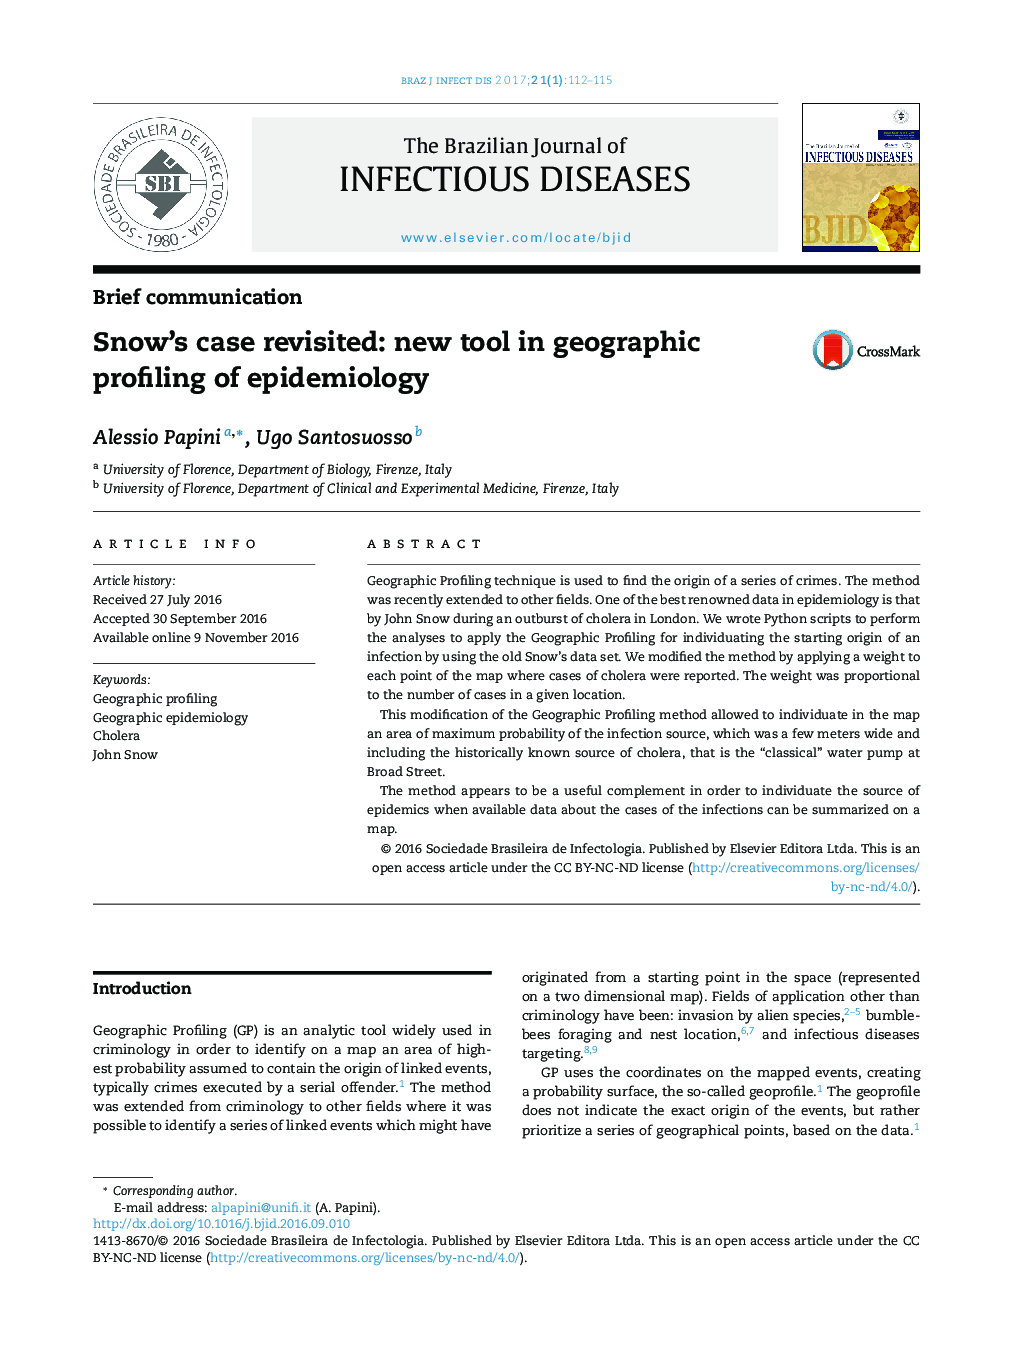 Snow's case revisited: new tool in geographic profiling of epidemiology